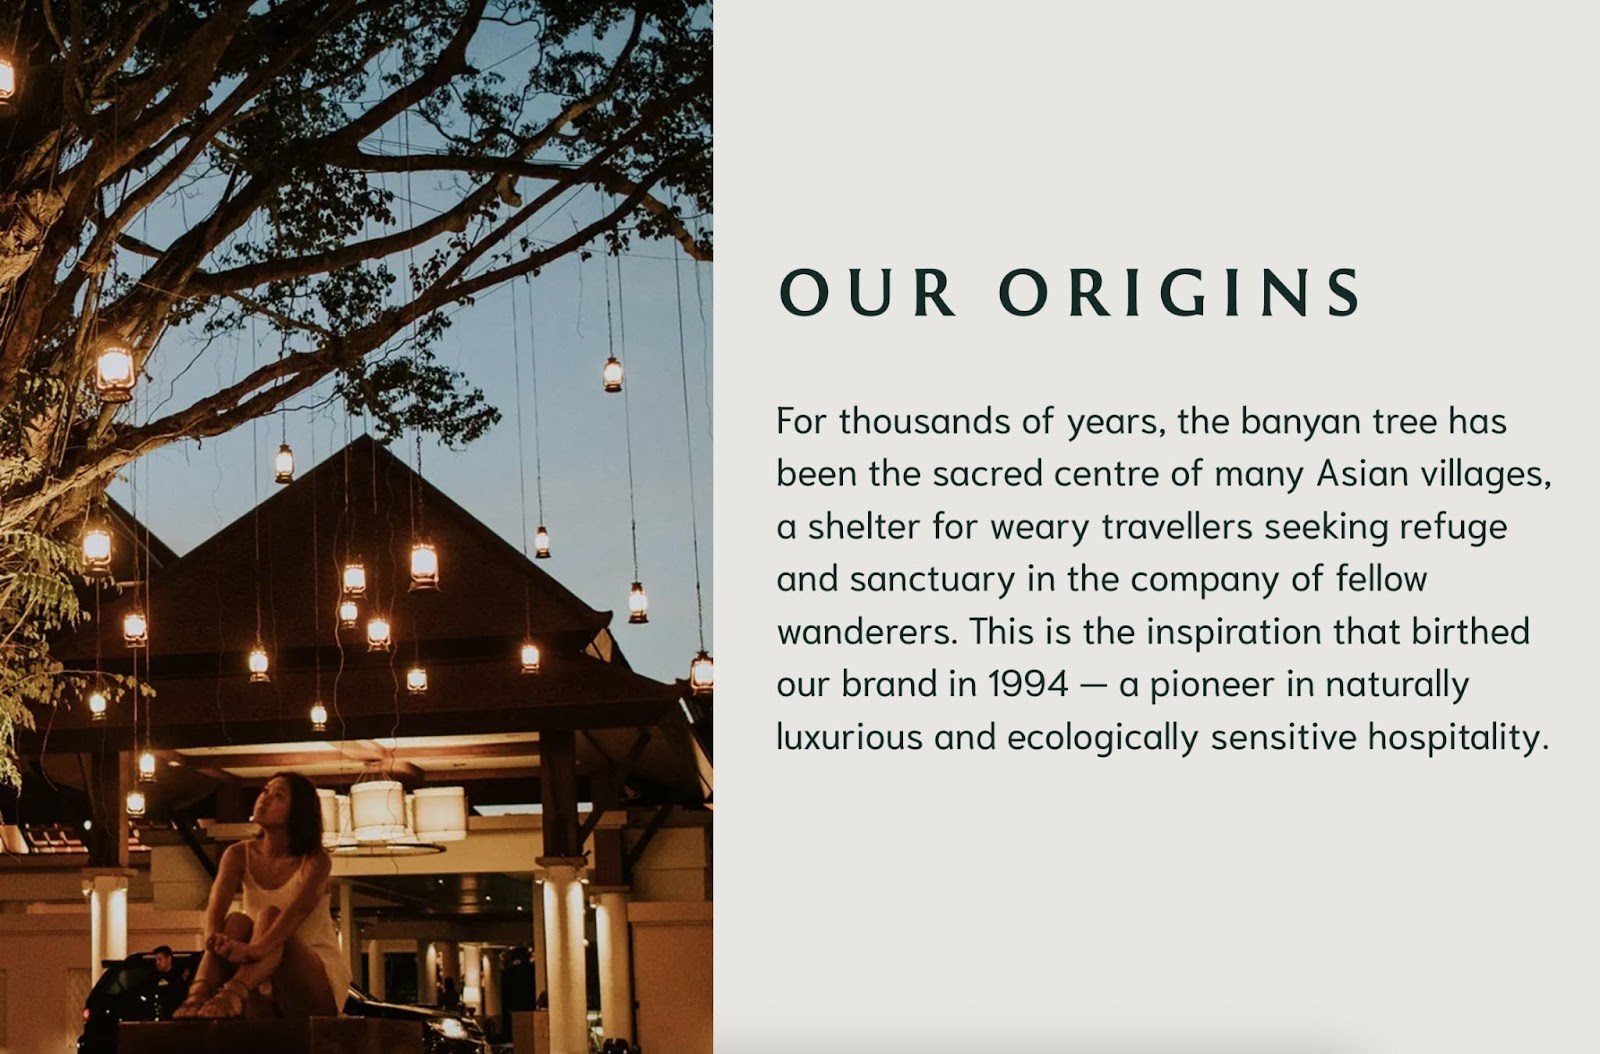 Barnyard Tree's "Our Origins" section